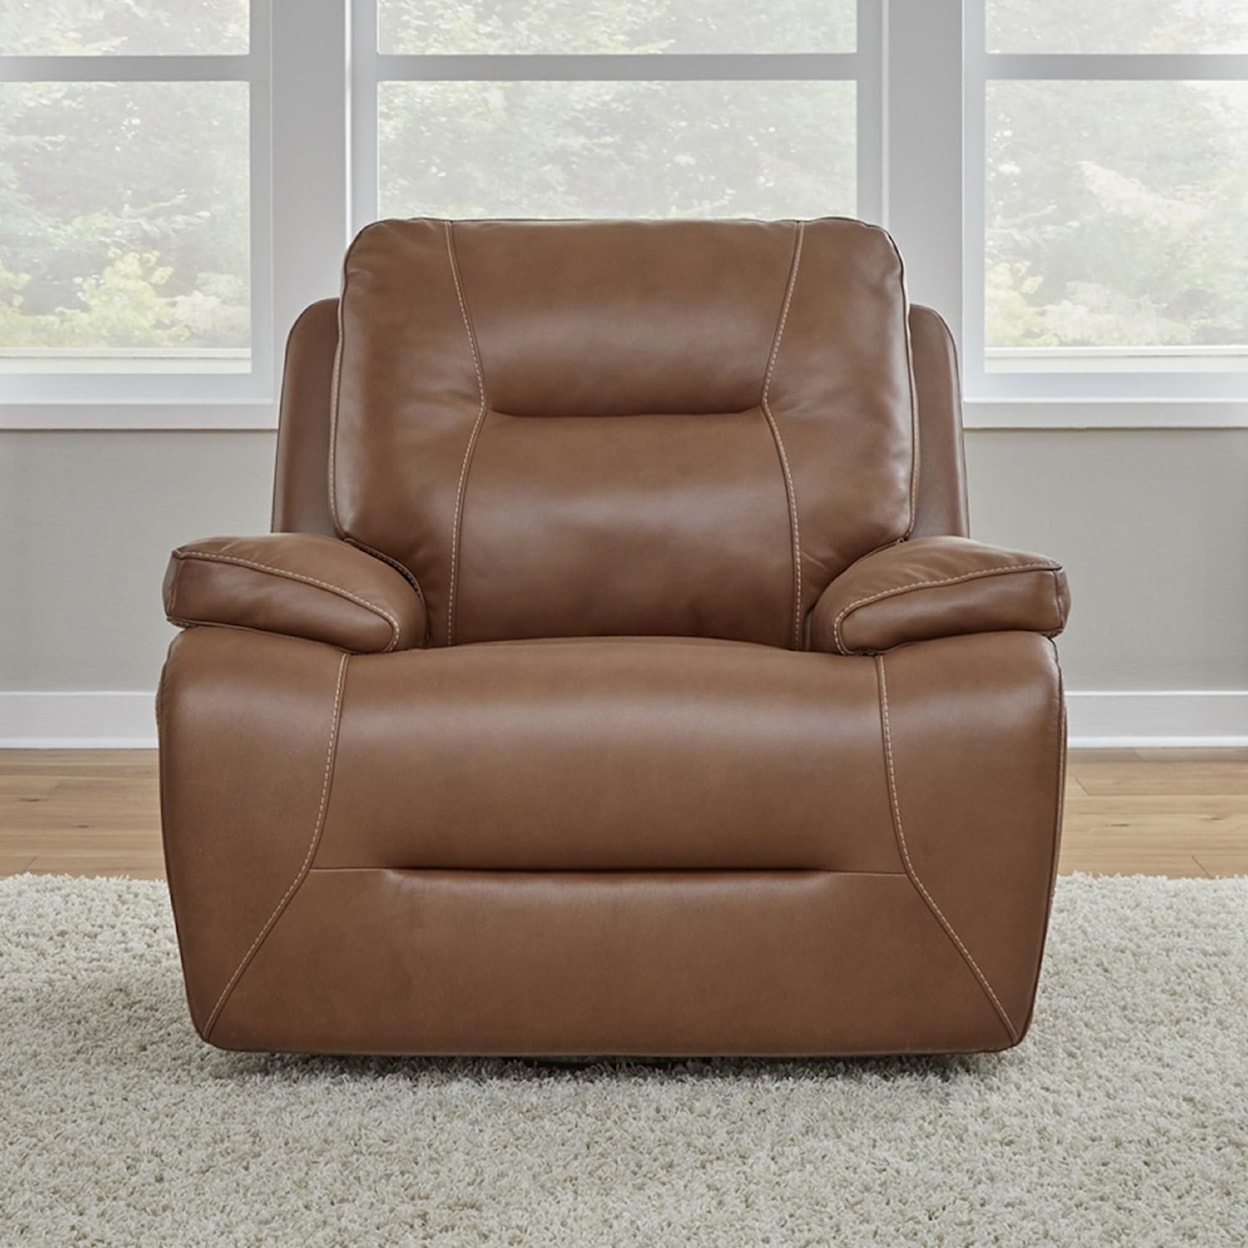 Liberty Furniture Cameron Leather Swivel Glider Power Recliner